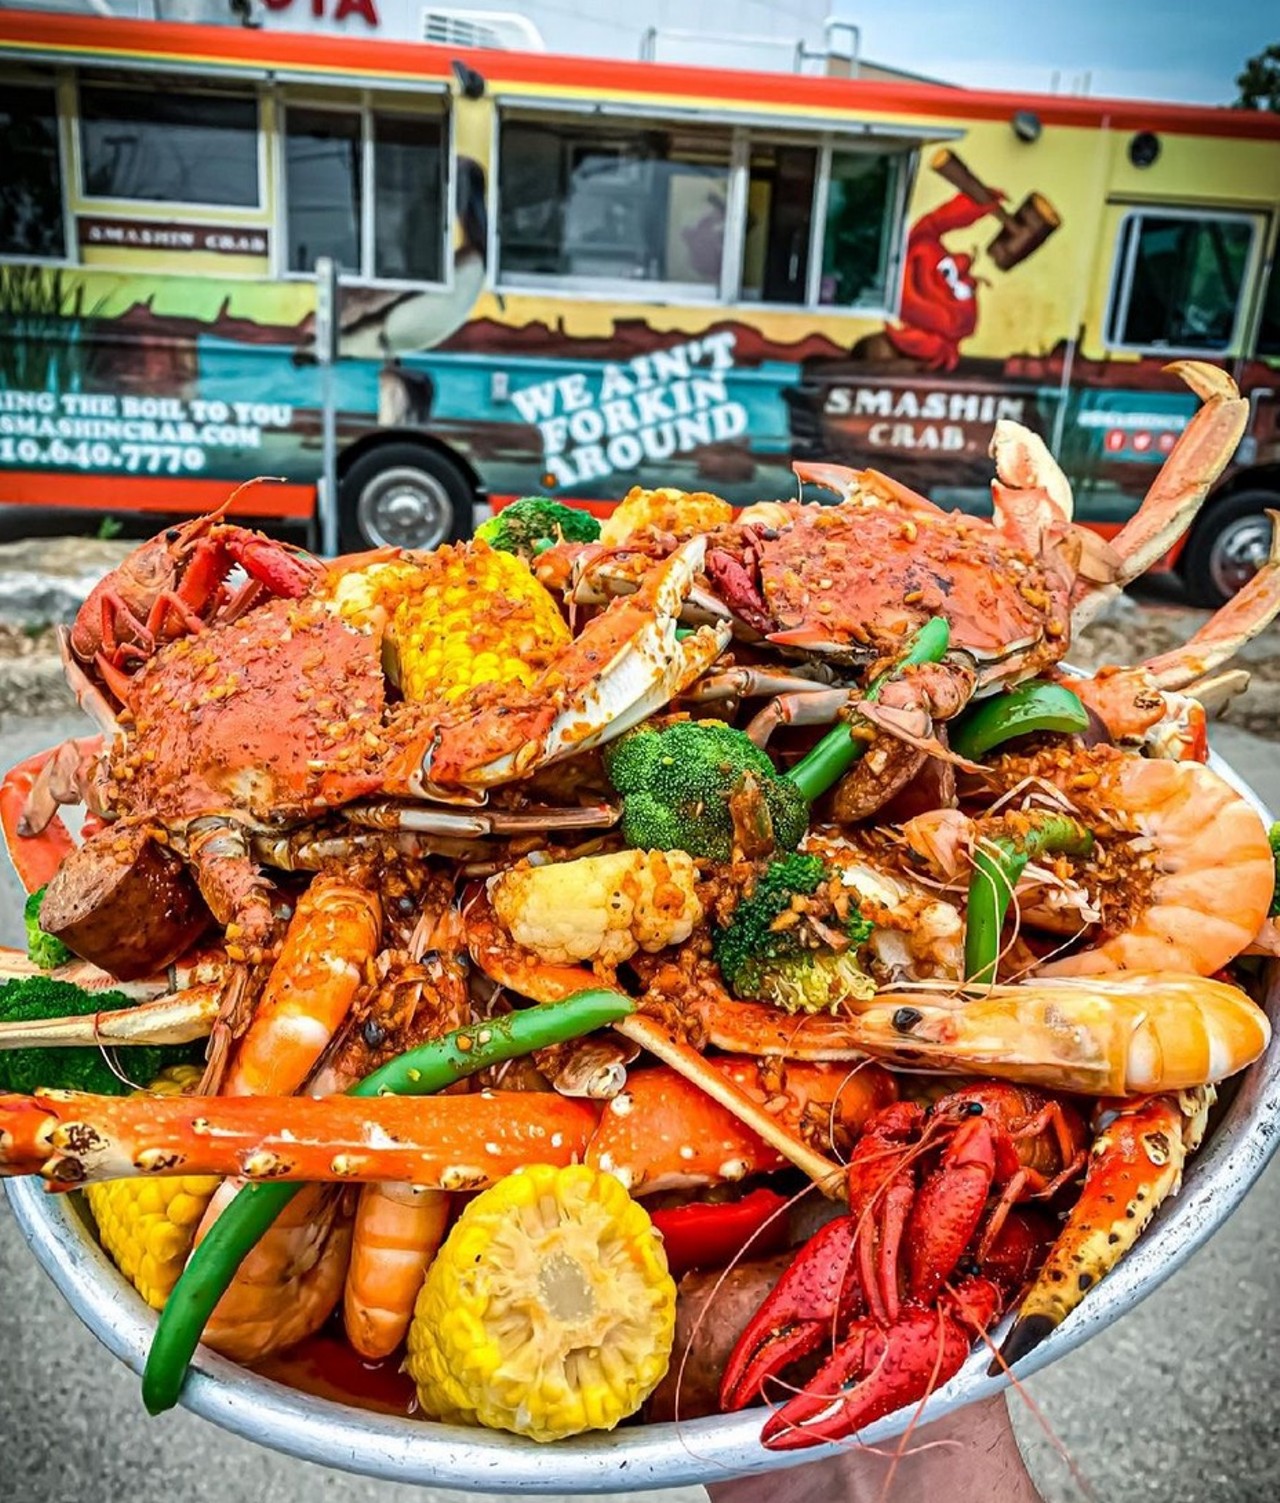 @eldereats
David Elder may be the competition, but we gotta give credit where it’s due. The host of KSAT’s Texas Eats regularly posts scrumptious pics to Instagram with accompanying deets on how to grab yourself the same meal. 
Photo via Instagram / eldereats